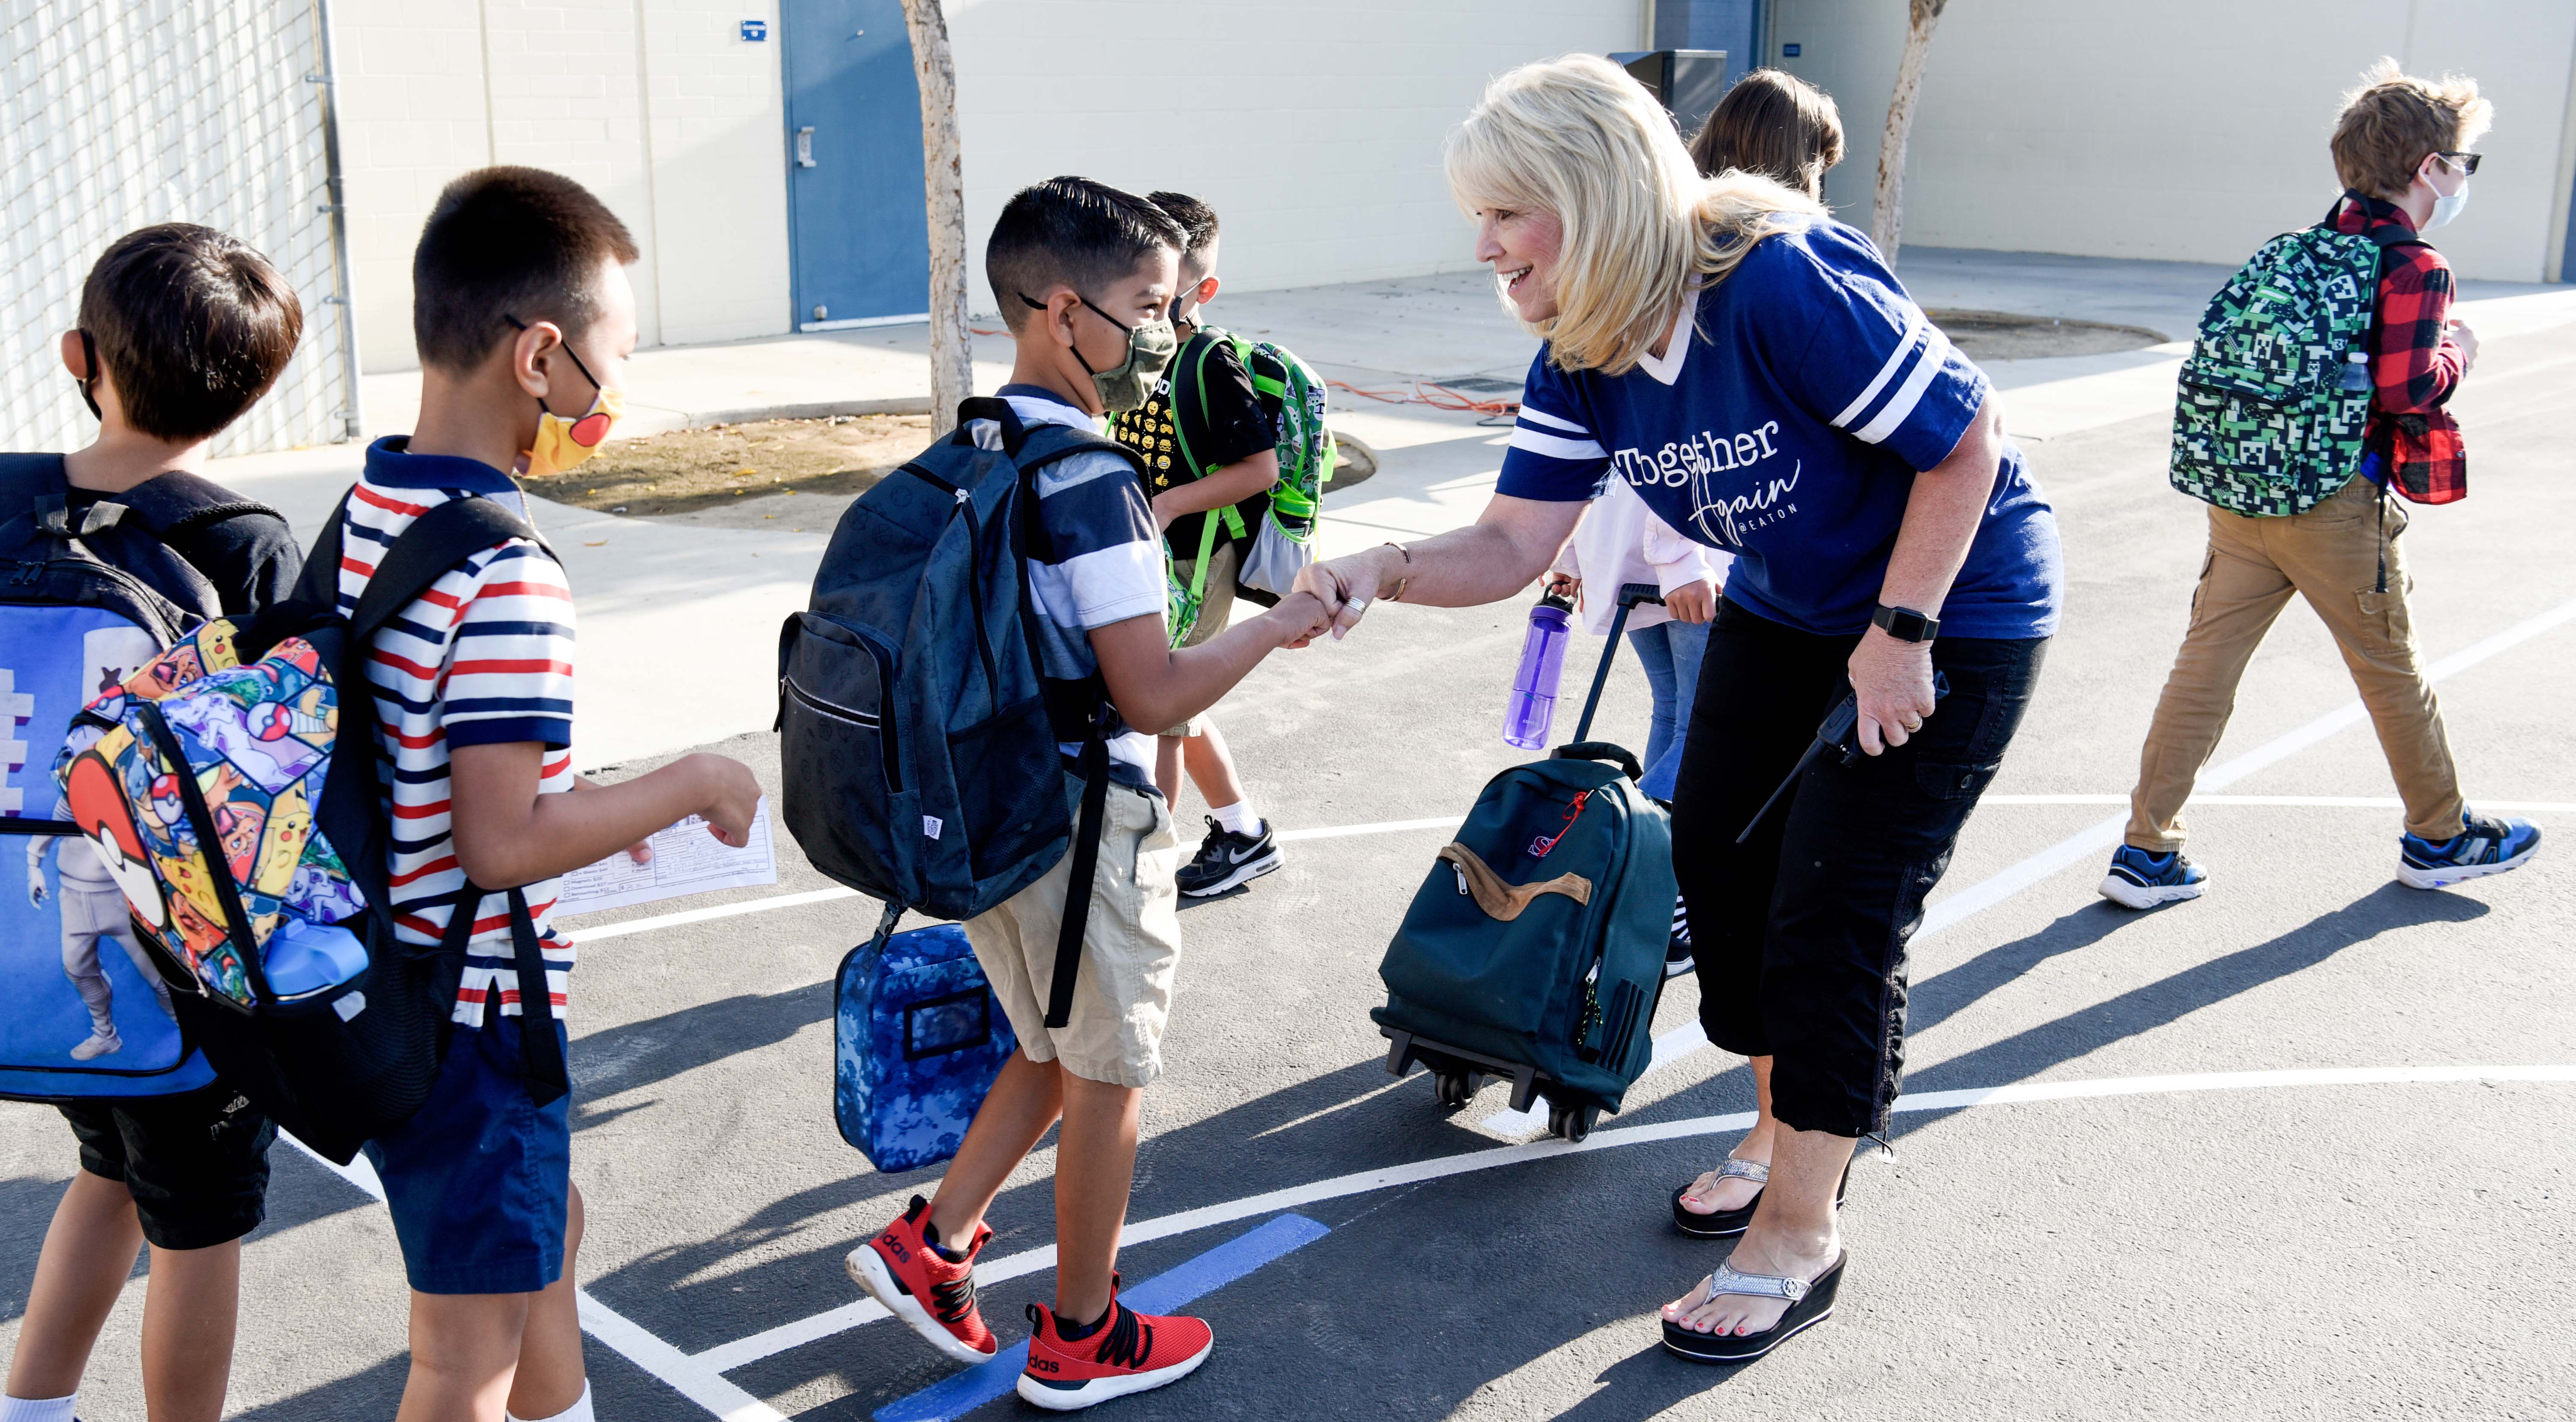 Principal Beth Beuttner greeted students at Fresno's Eaton Elementary School, part of a district partnering with SDSU on an equity project.